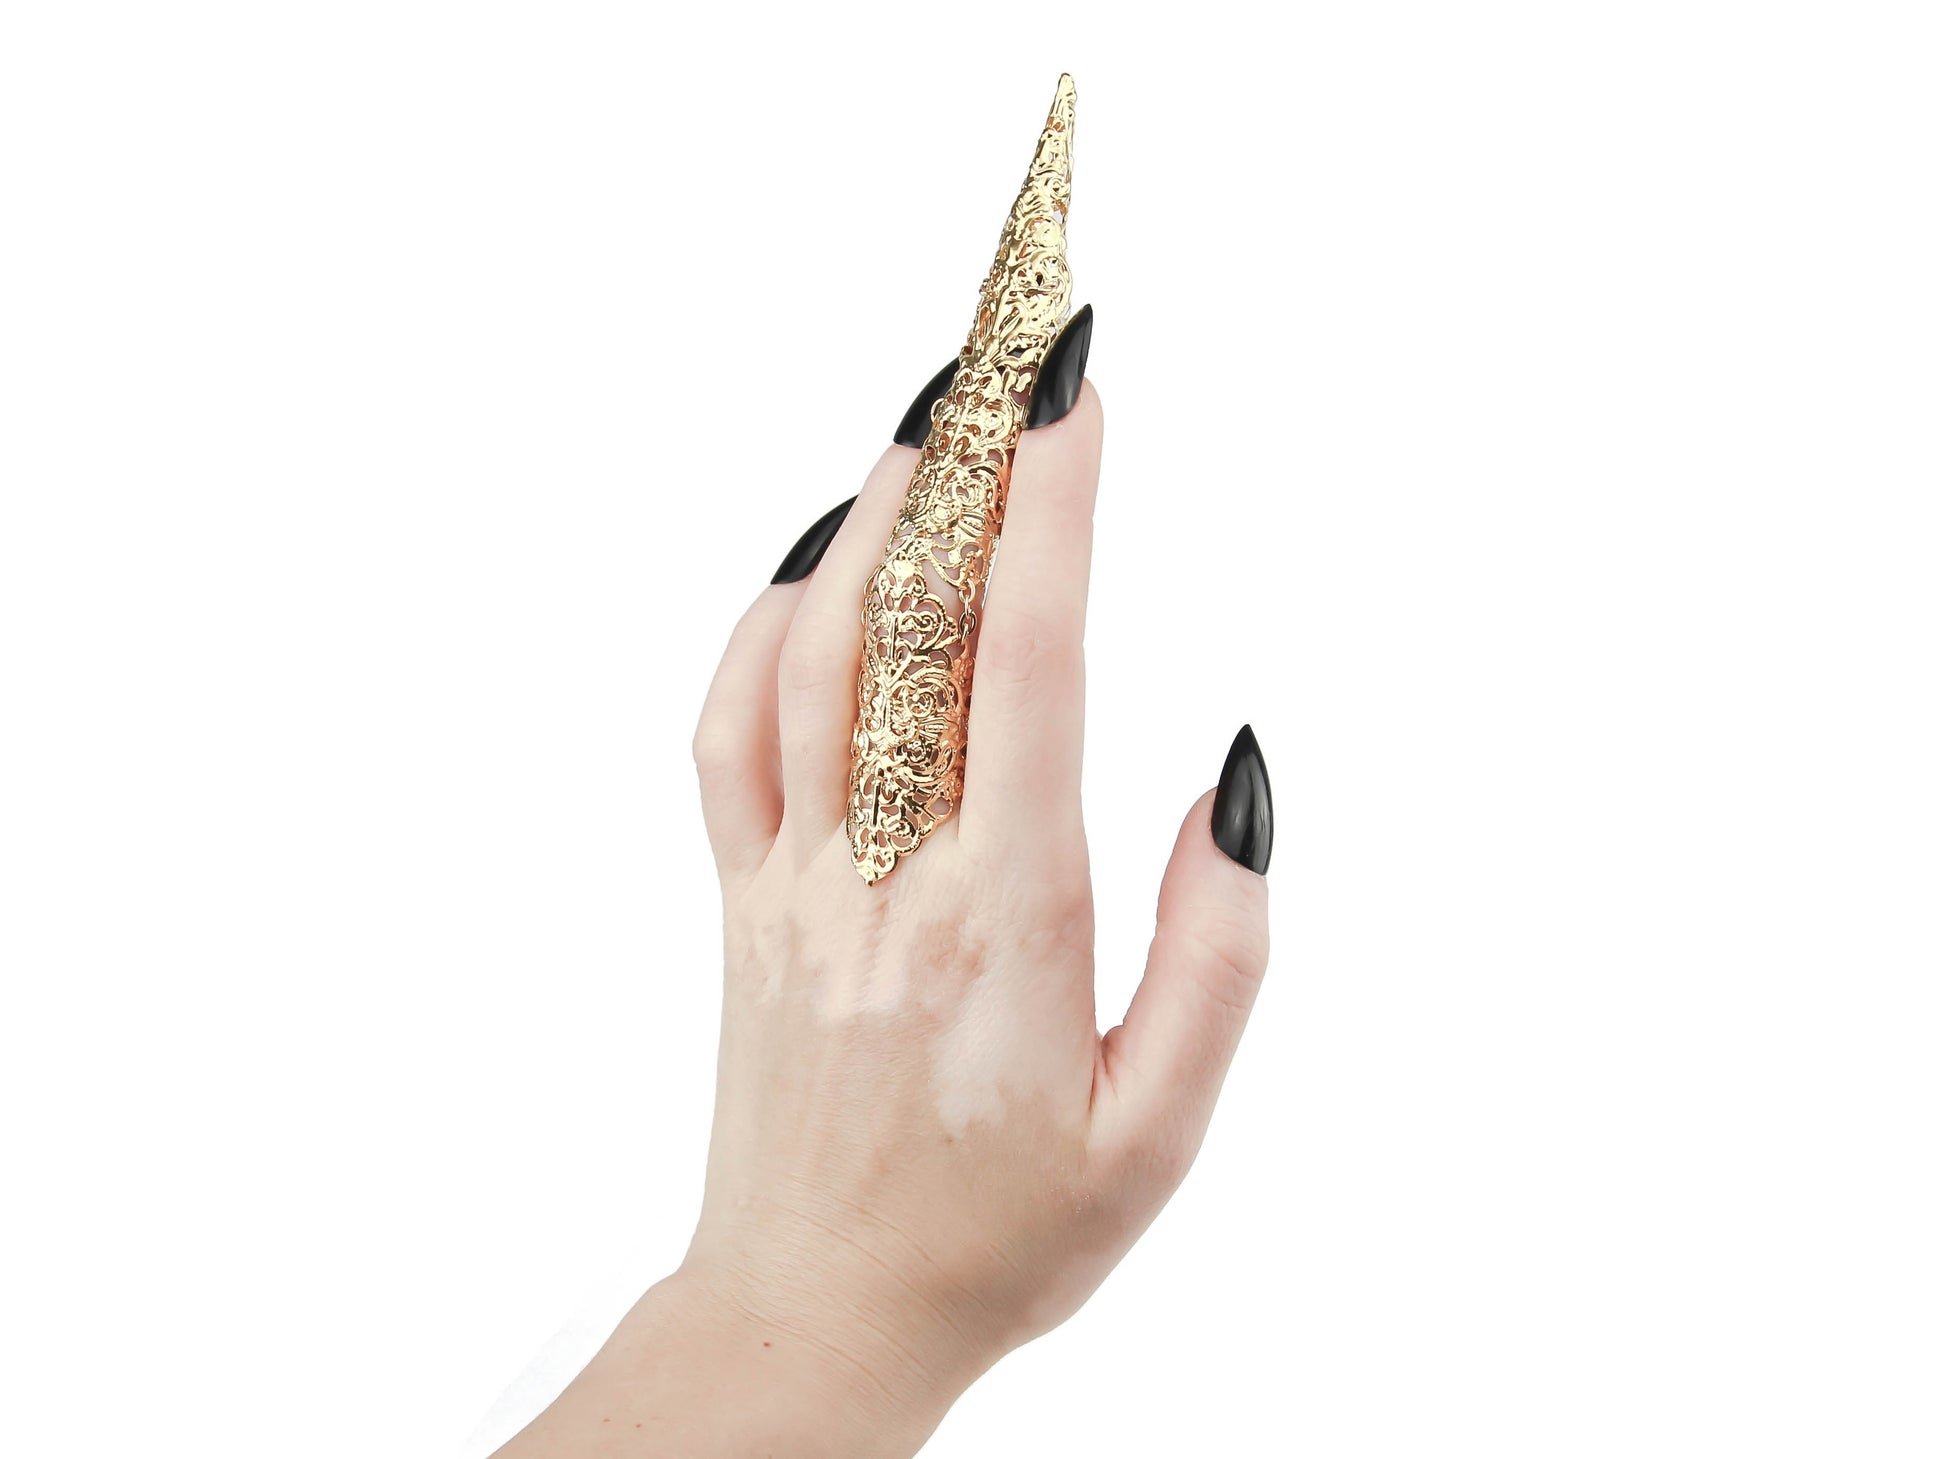 A single, ornate full-finger gold claw ring with a sharp, long nail claw adorns a hand, reflecting Myril Jewels' signature dark avant-garde style. This Neo Gothic piece is a blend of Halloween and punk jewelry aesthetics, ideal for minimal goth enthusiasts or as a bold goth girlfriend gift.